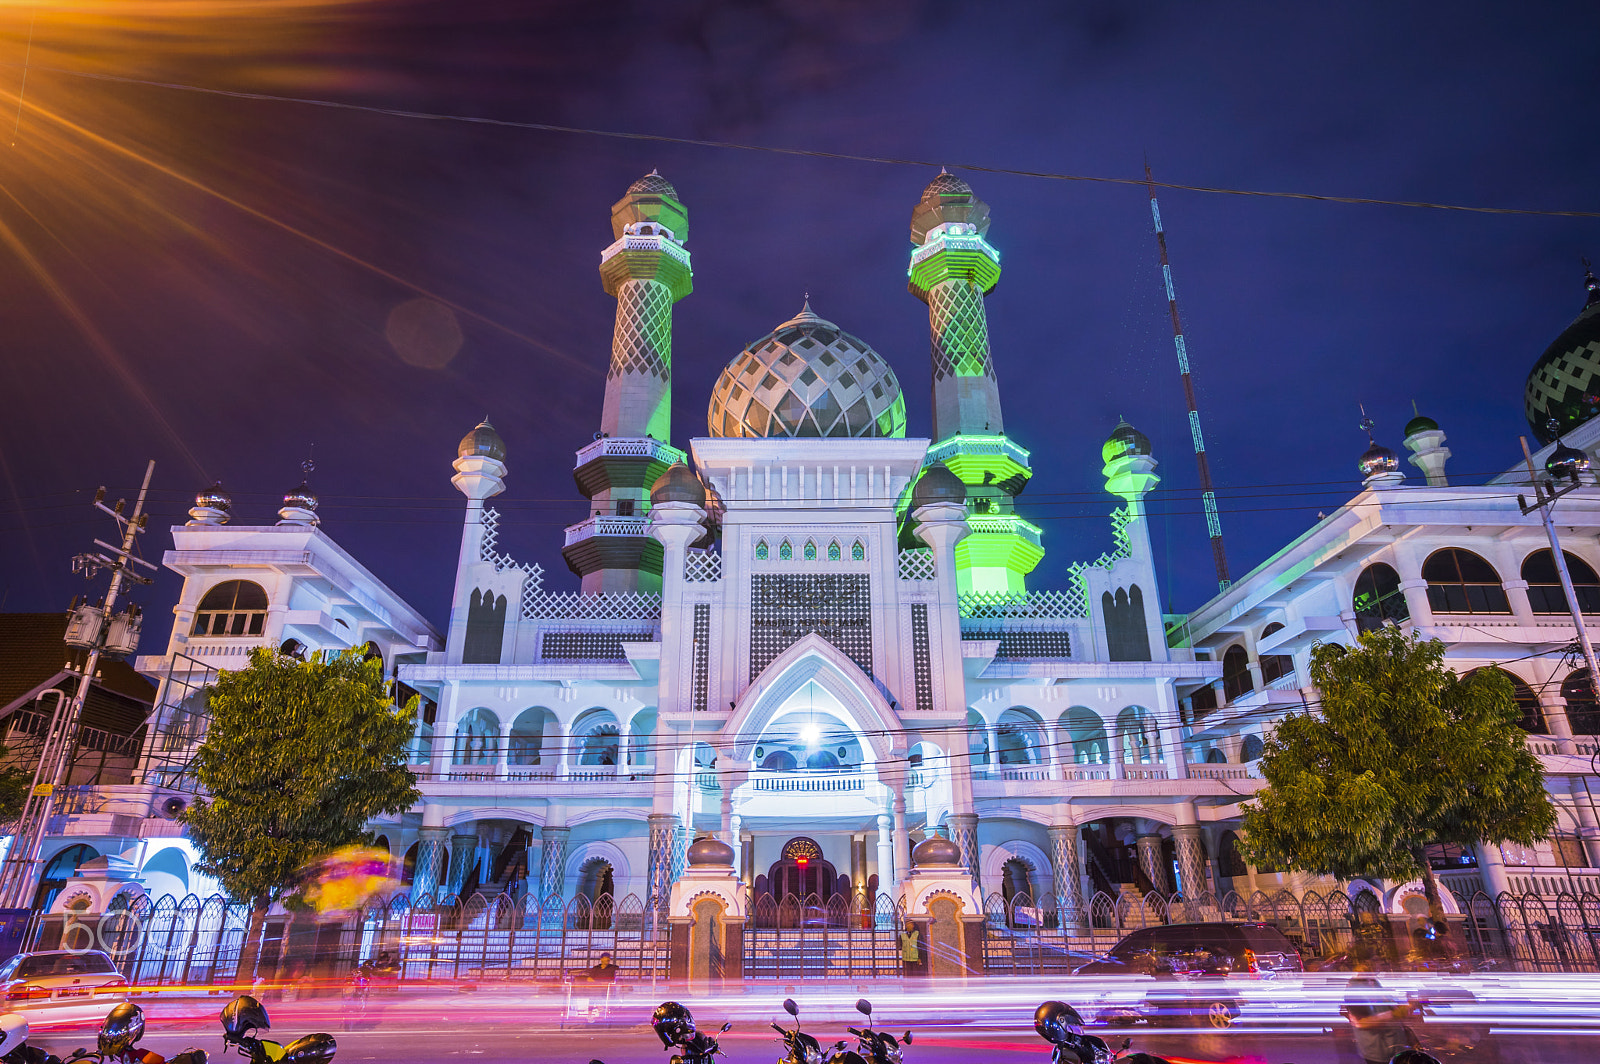 Sony a7 sample photo. Jami great mosque photography